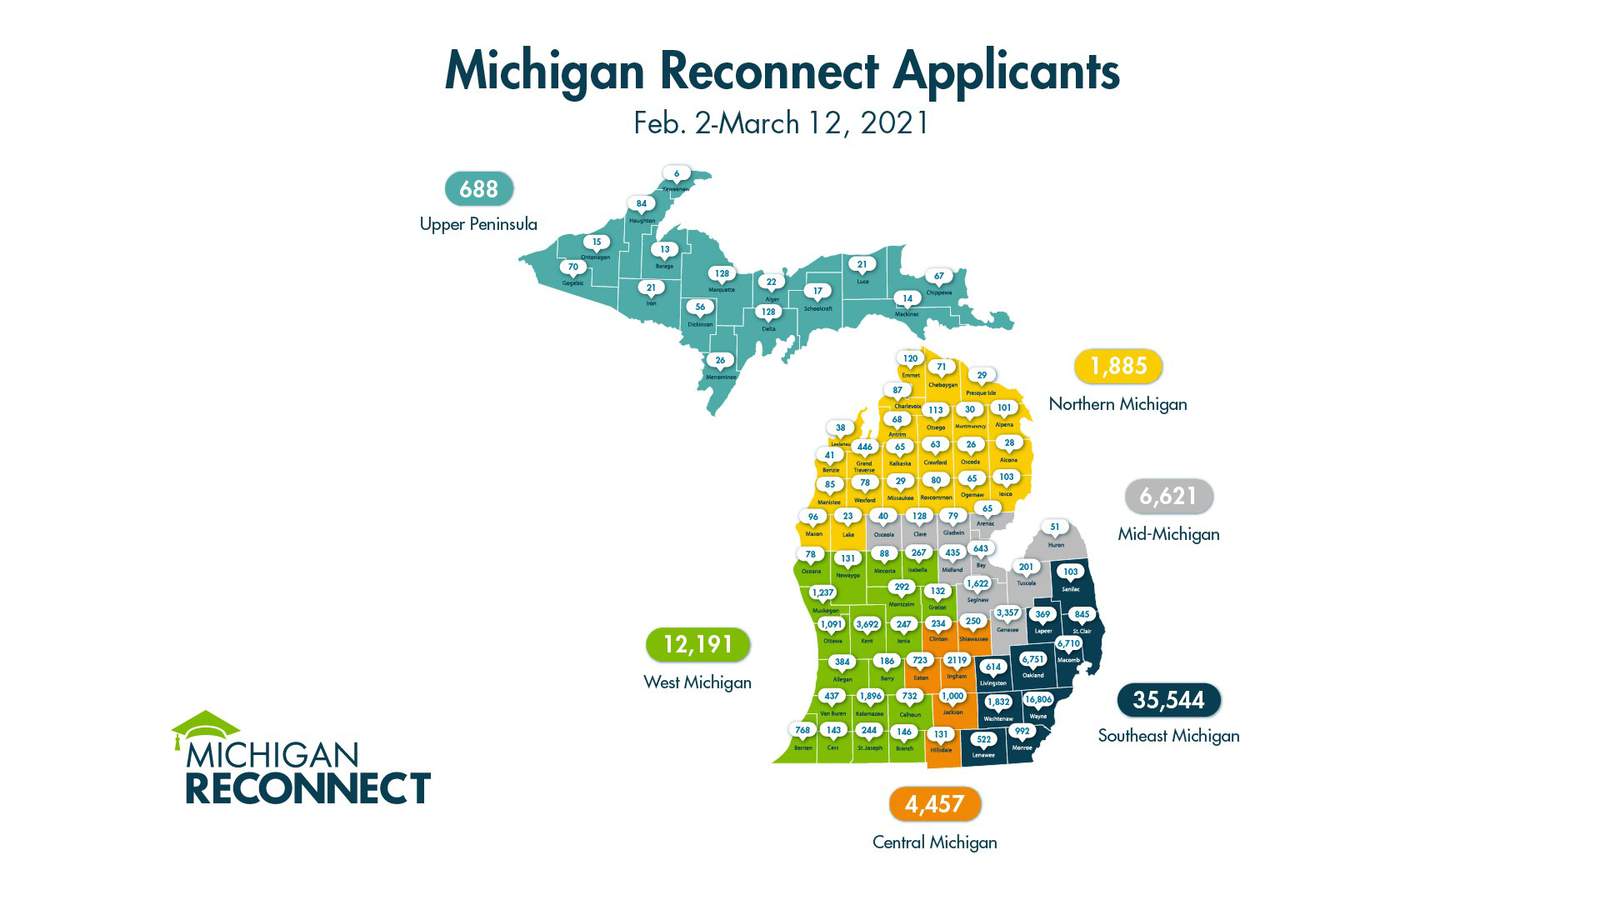 More than 62,000 apply for tuition assistance through Michigan Reconnect